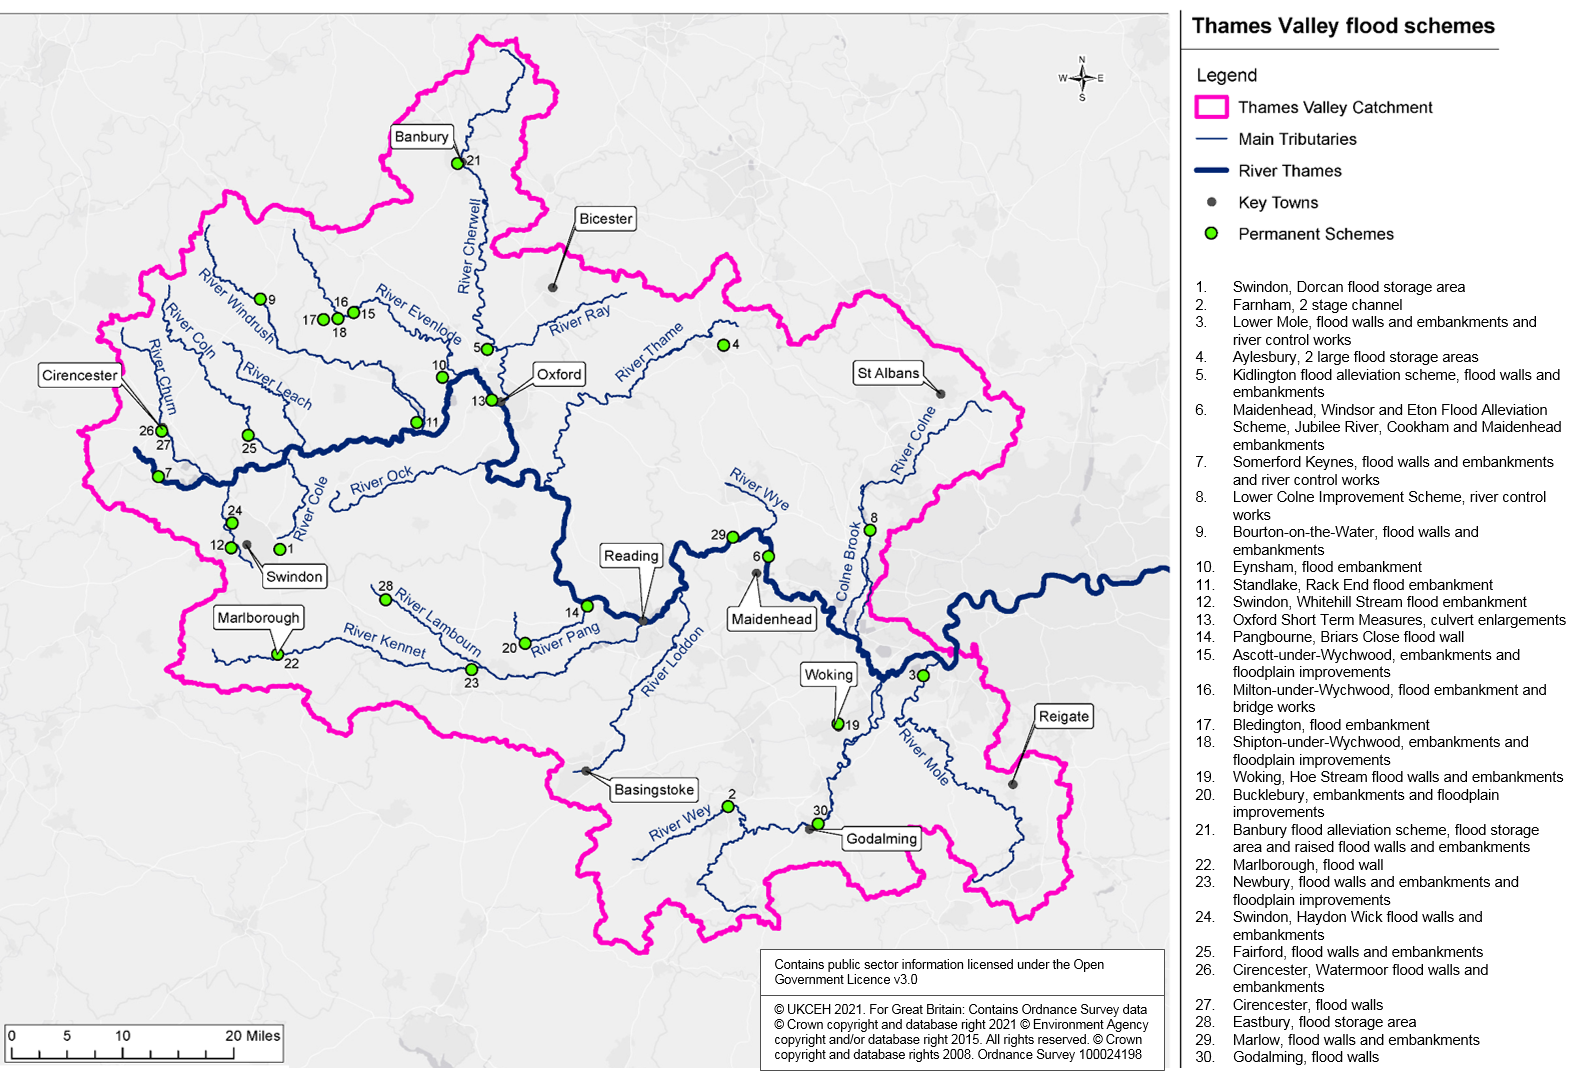 Existing and developing schemes in the Thames Valley.